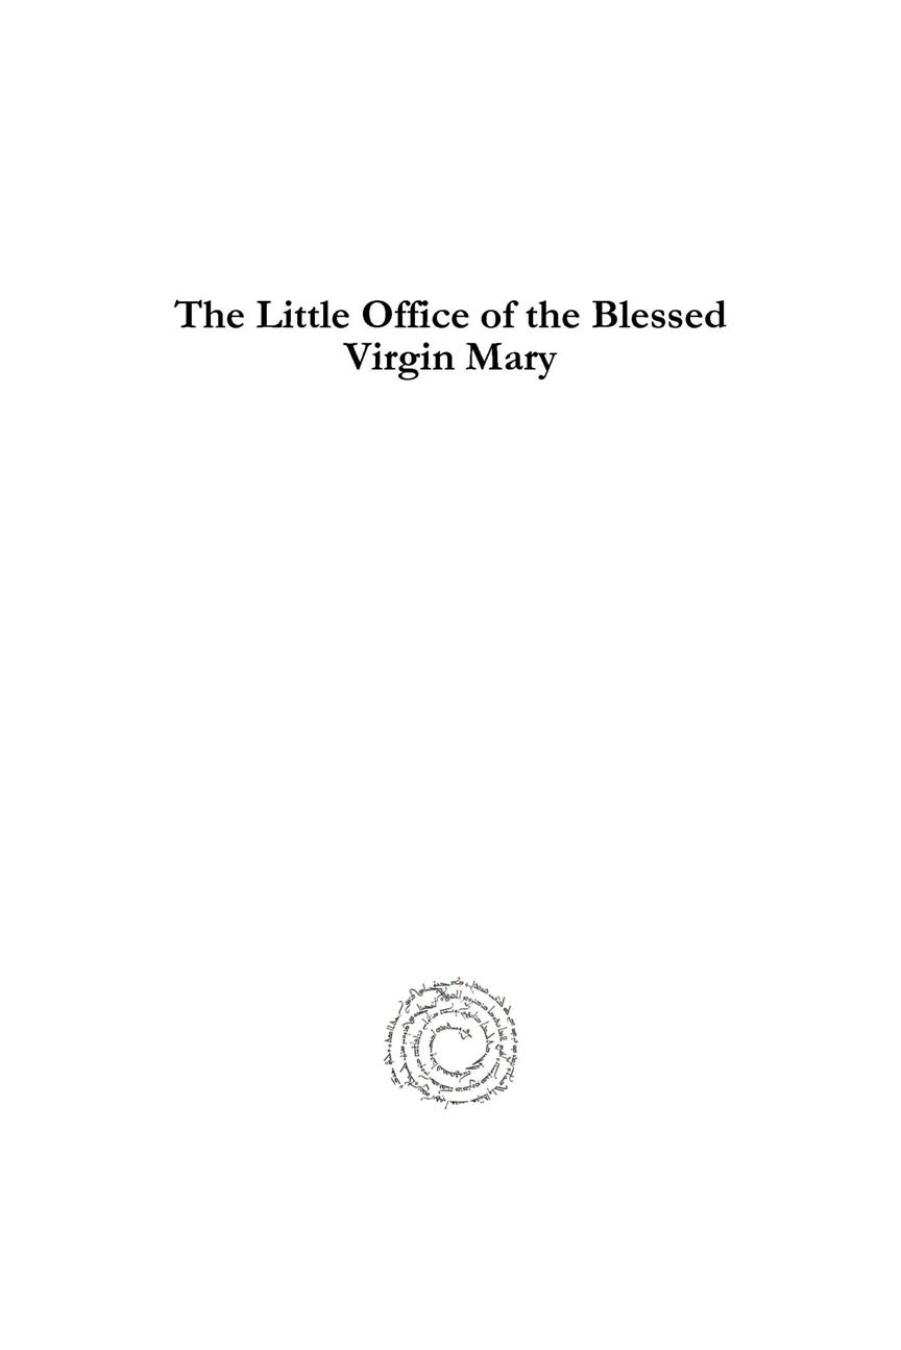 The Little Office of the Blessed Virgin Mary: Petit office de la TrÃ¨s-Sainte Vierge by Anonymous